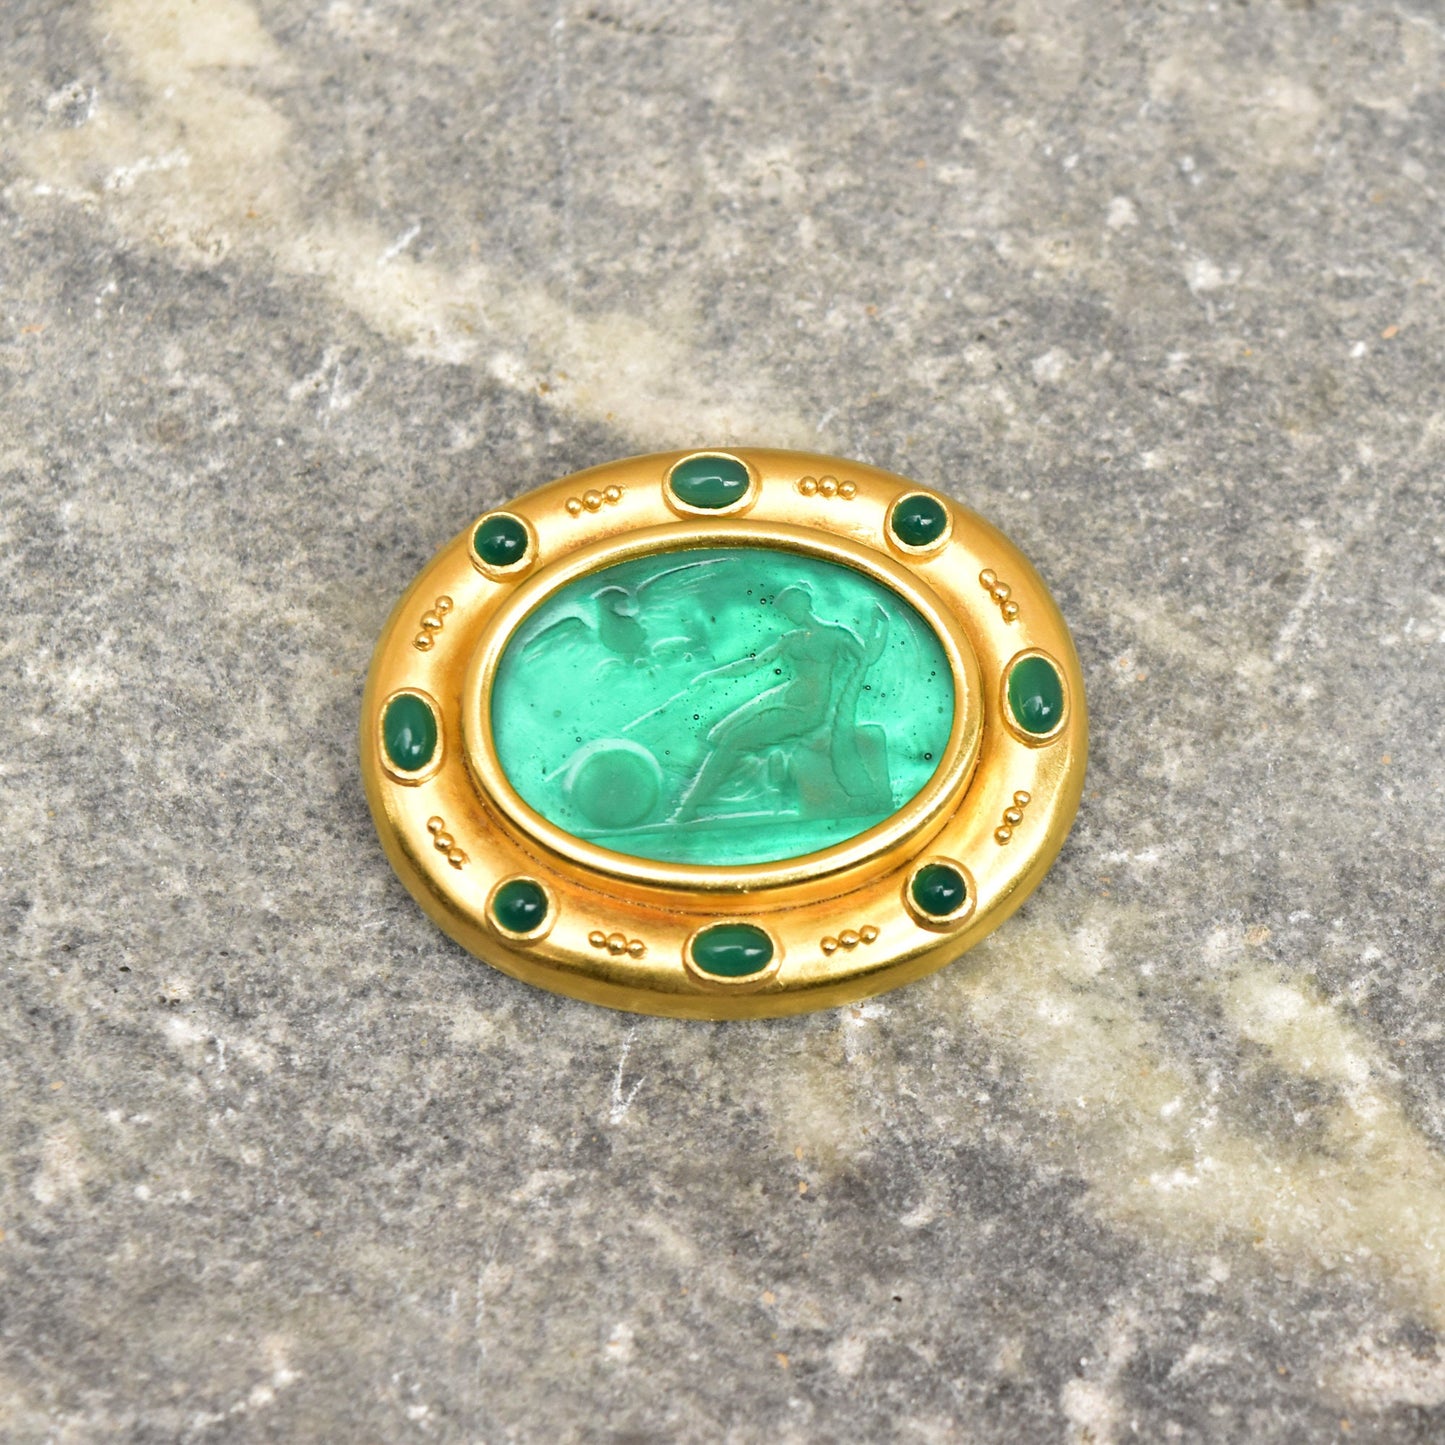 18K gold brooch pendant featuring a green Venetian glass intaglio with emerald cabochons, designed by Elizabeth Locke. The oval intaglio depicts a mythological scene and is set in an ornate gold frame with mother of pearl backing. The brooch measures approximately 2 inches wide.